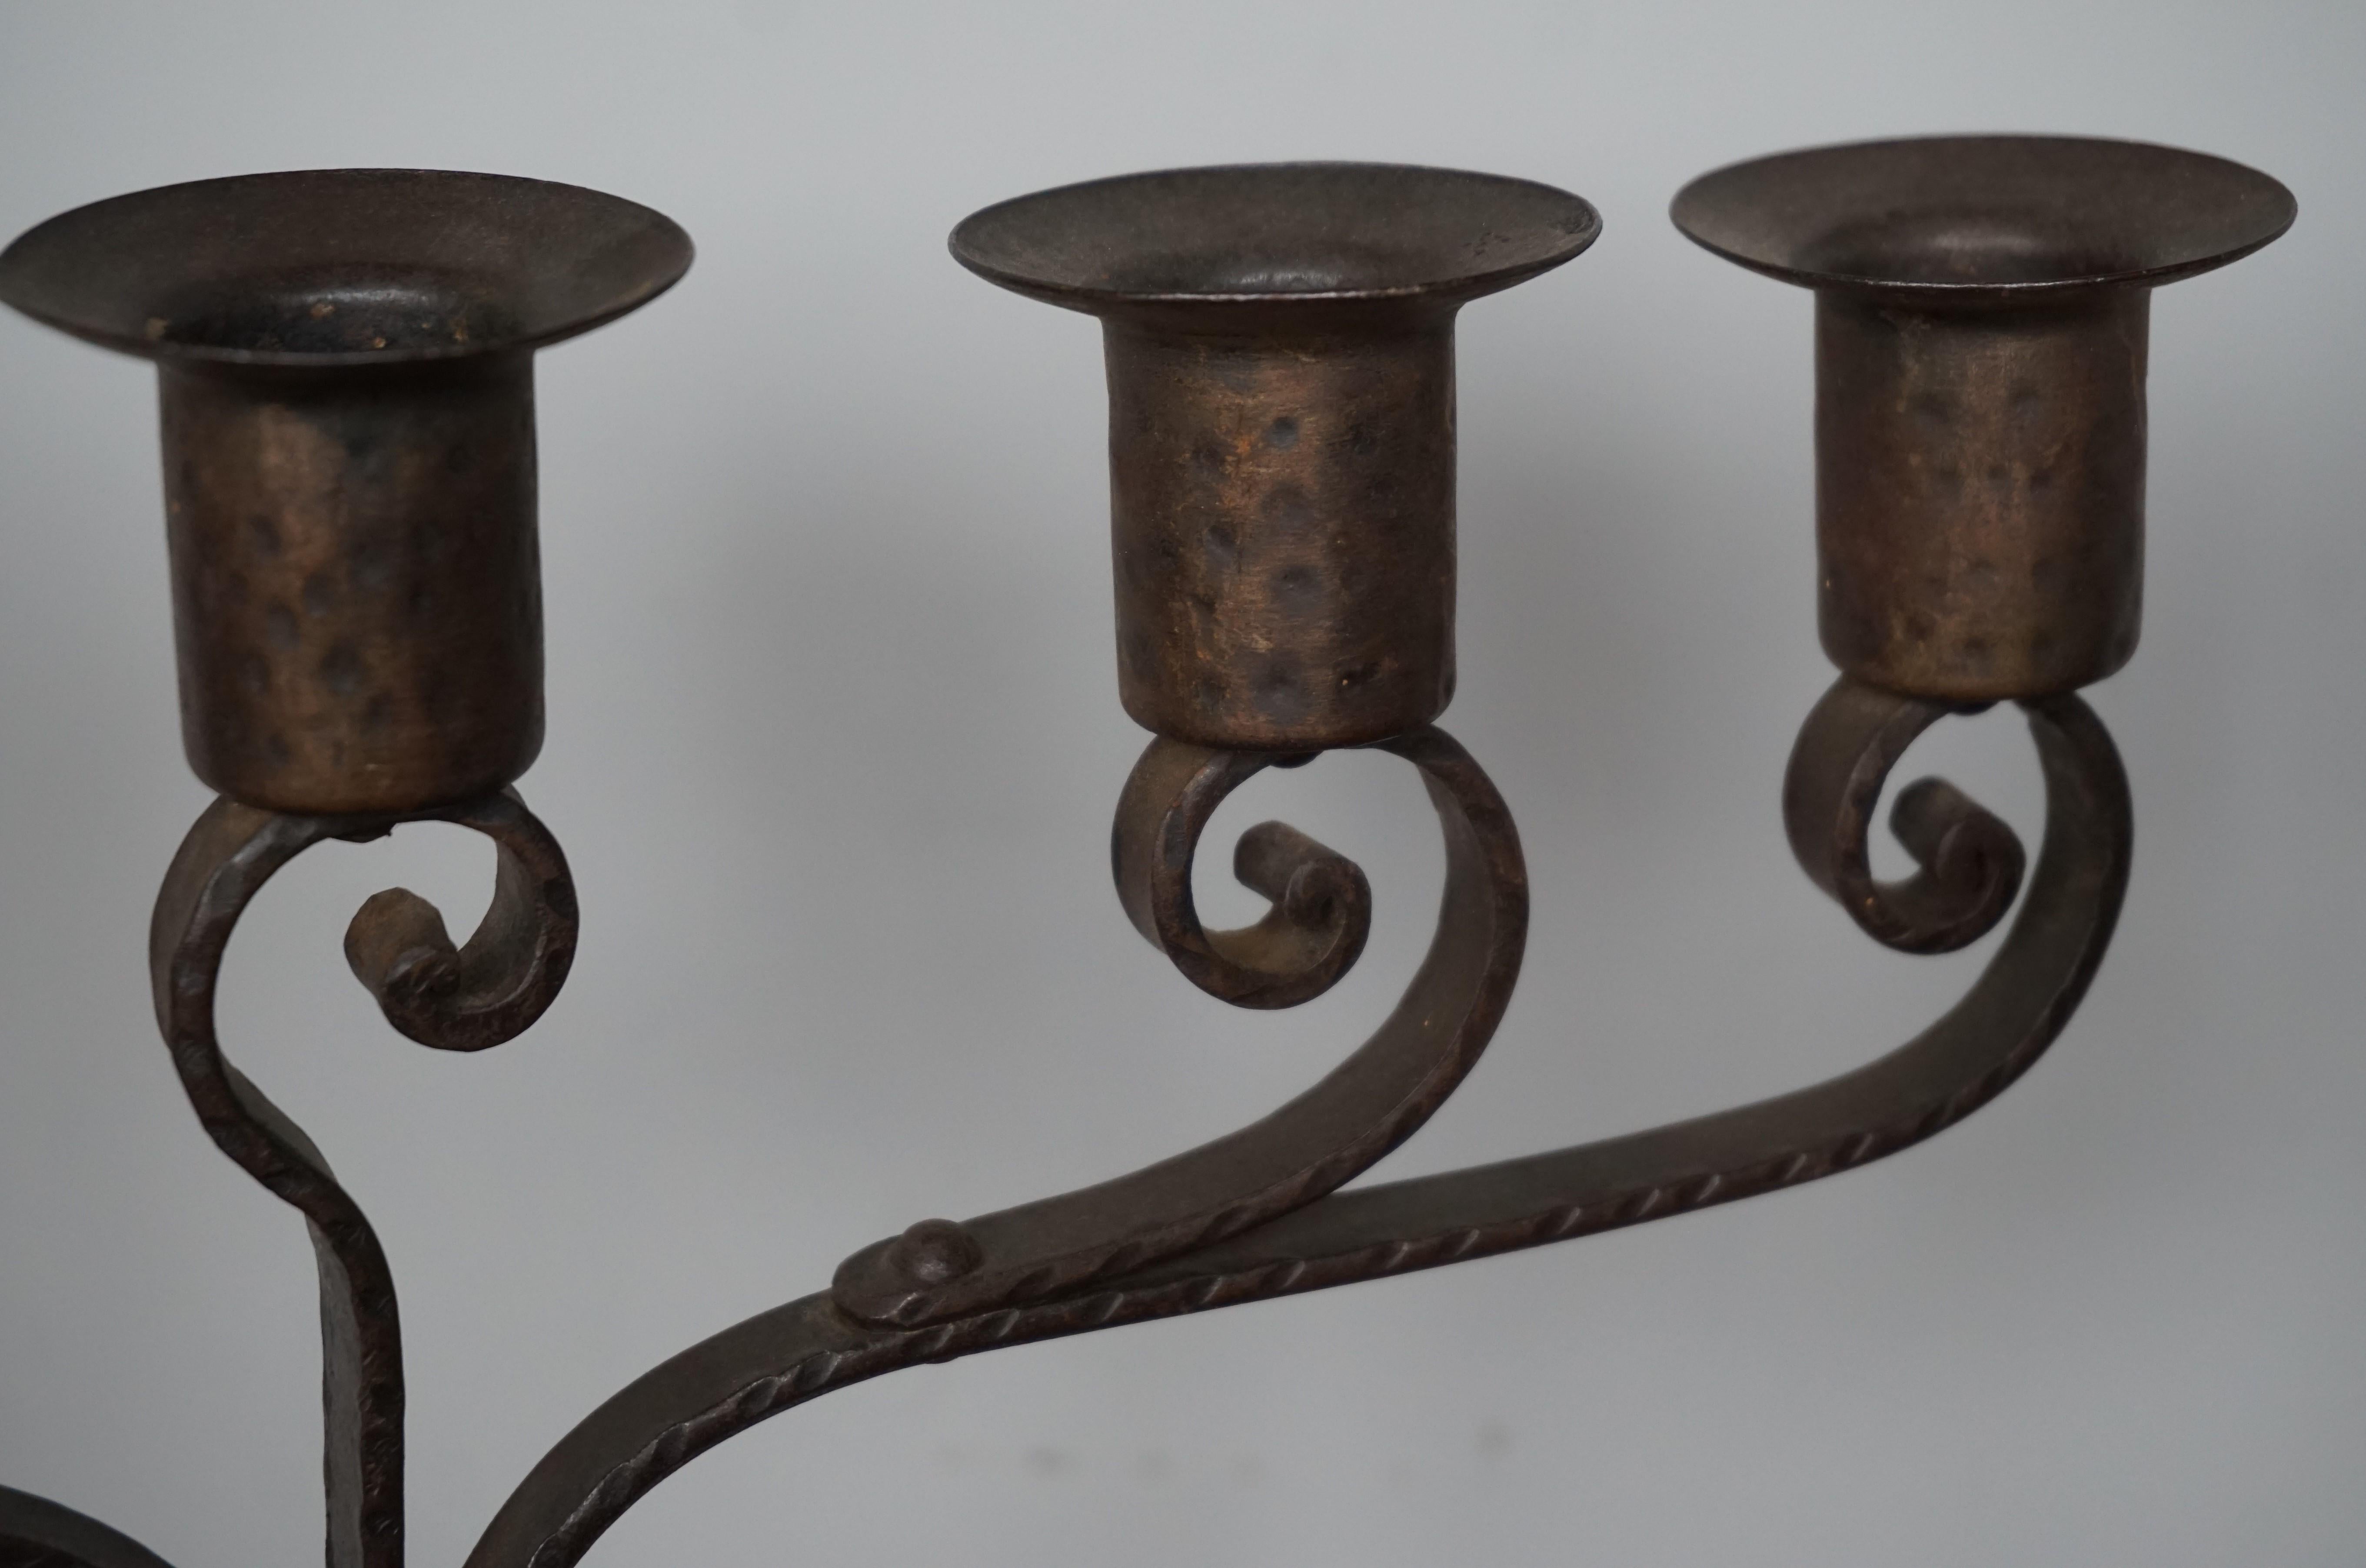 Unique Pair of Hand Forged Wrought Iron Arts & Crafts Table Candelabras, 1910s For Sale 6